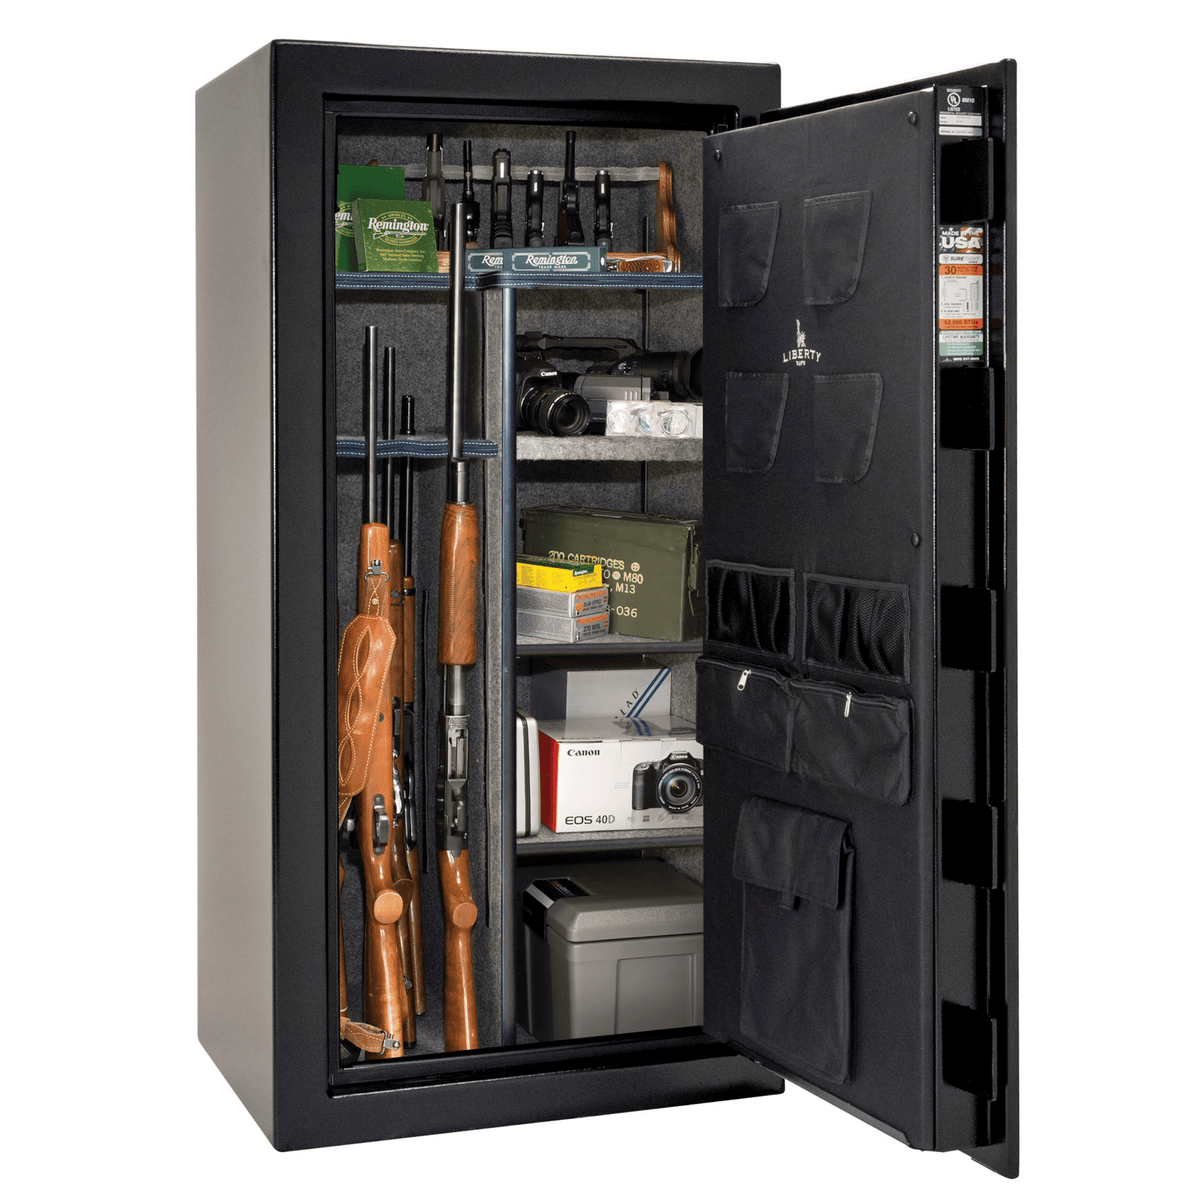 Freedom Series | Level 2 Security | 40 Minute Fire Rating | Liberty Safe Norcal.